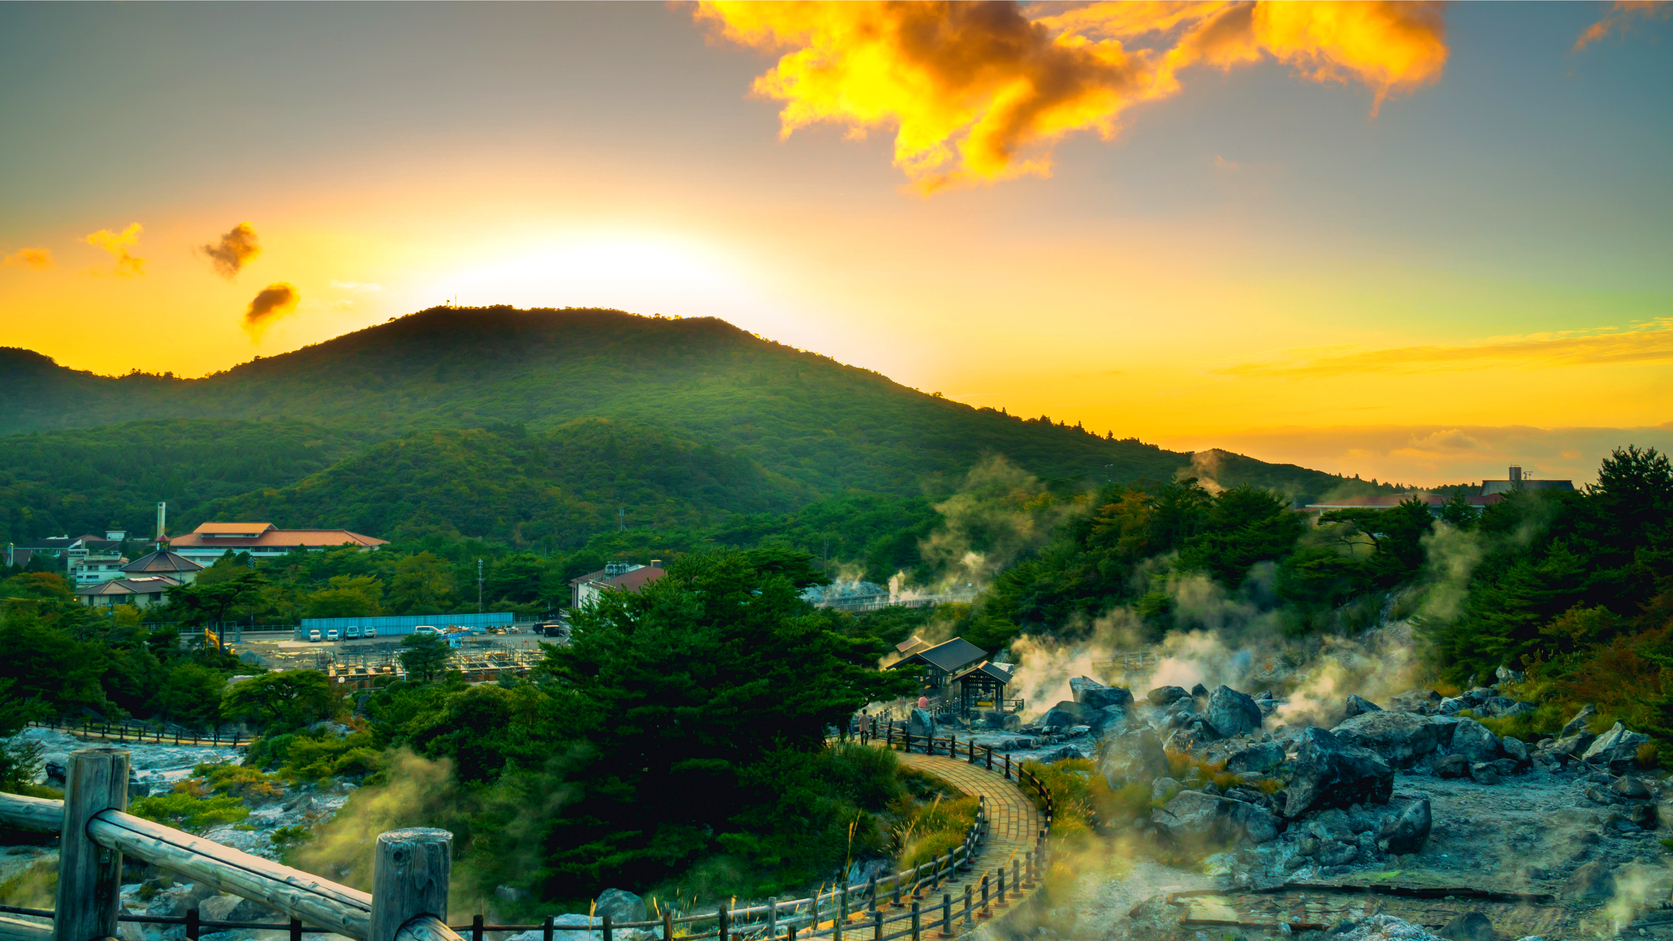 Unzen Onsen: This Could be Heaven or This Could be Hell